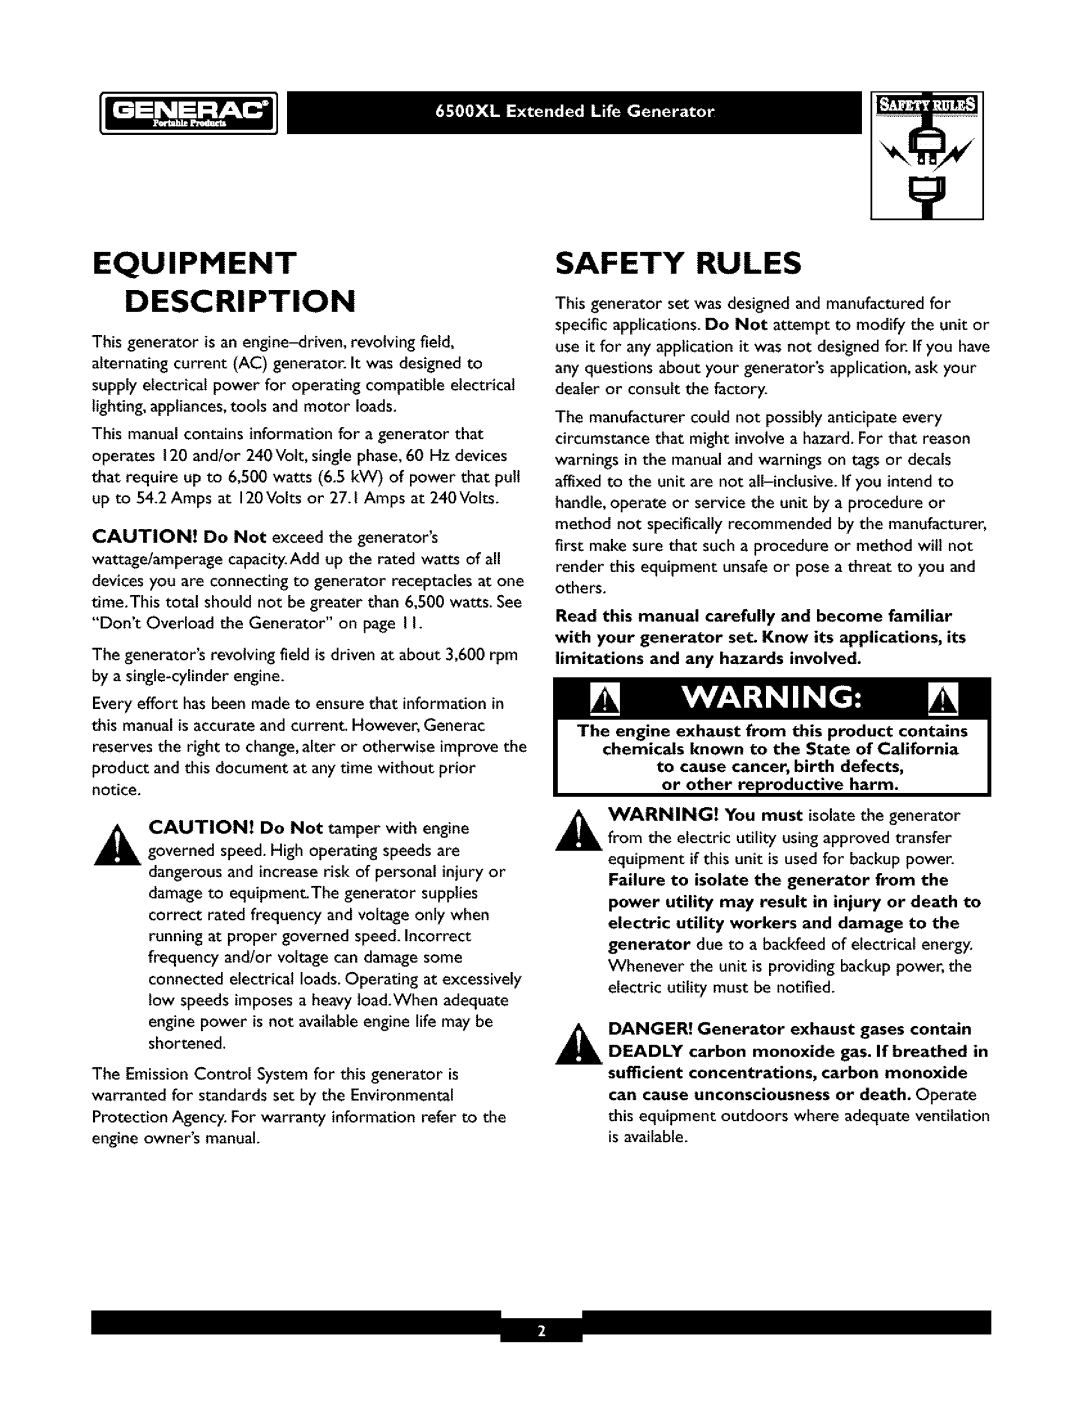 Generac 6500XL owner manual Equipment Description, Safety Rules, DANGER! Generator exhaust gases contain 